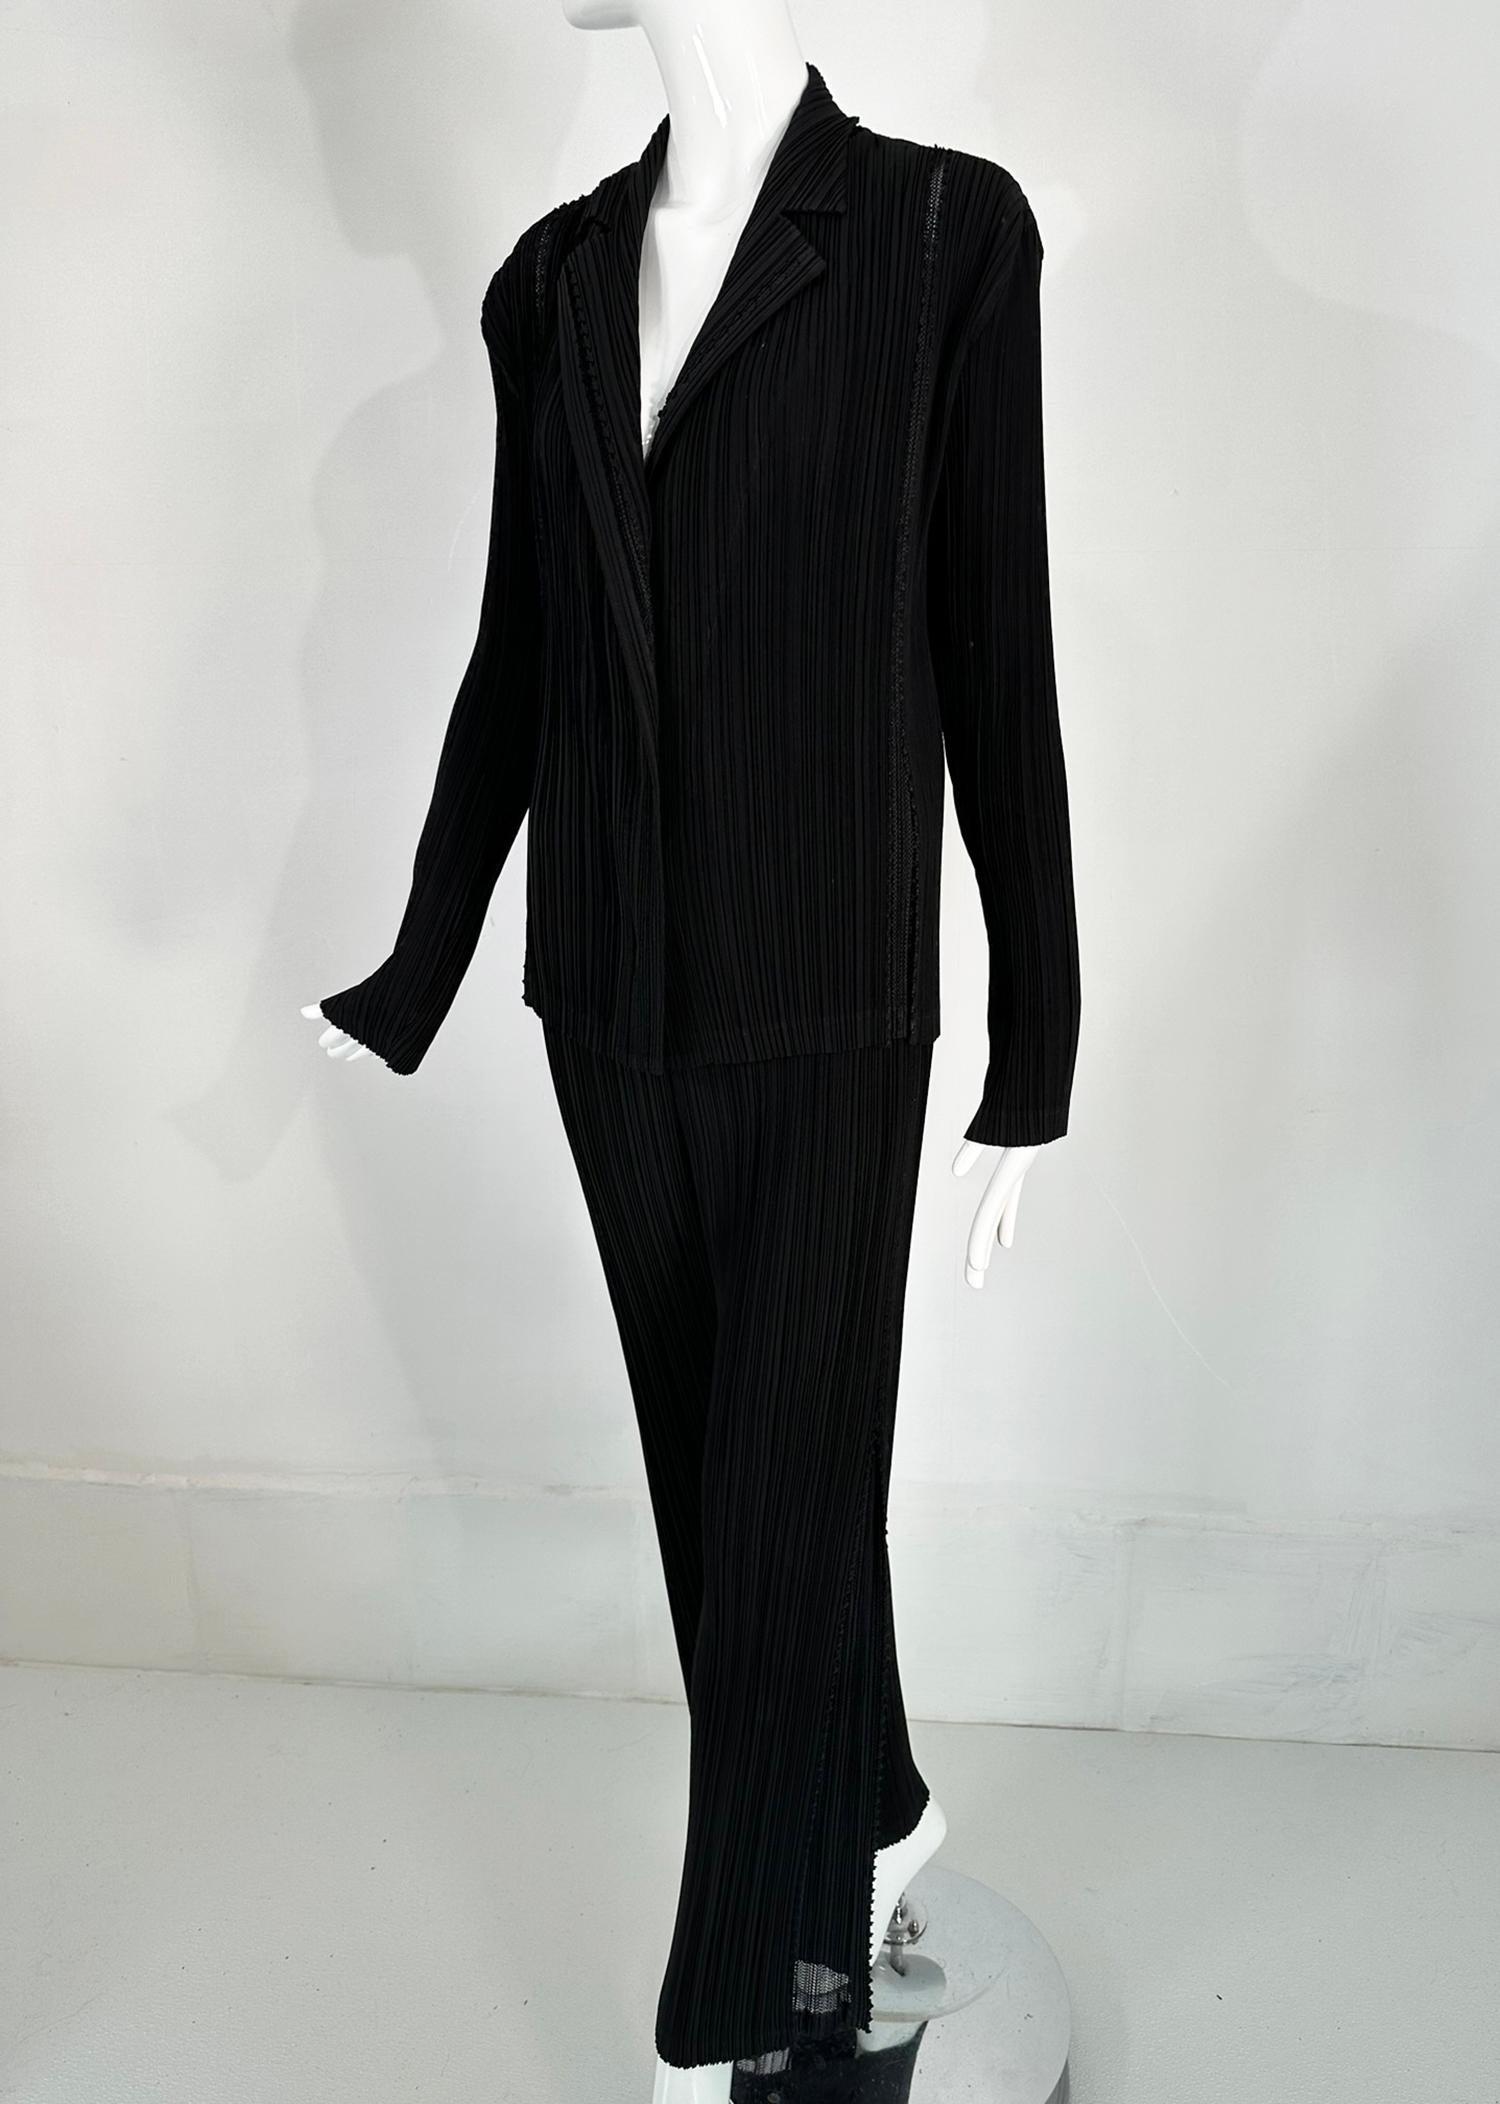 Issey Miyake Fete 2pc Jacket & Pant Black Pleats with Open Mesh Insertion Size 4 7